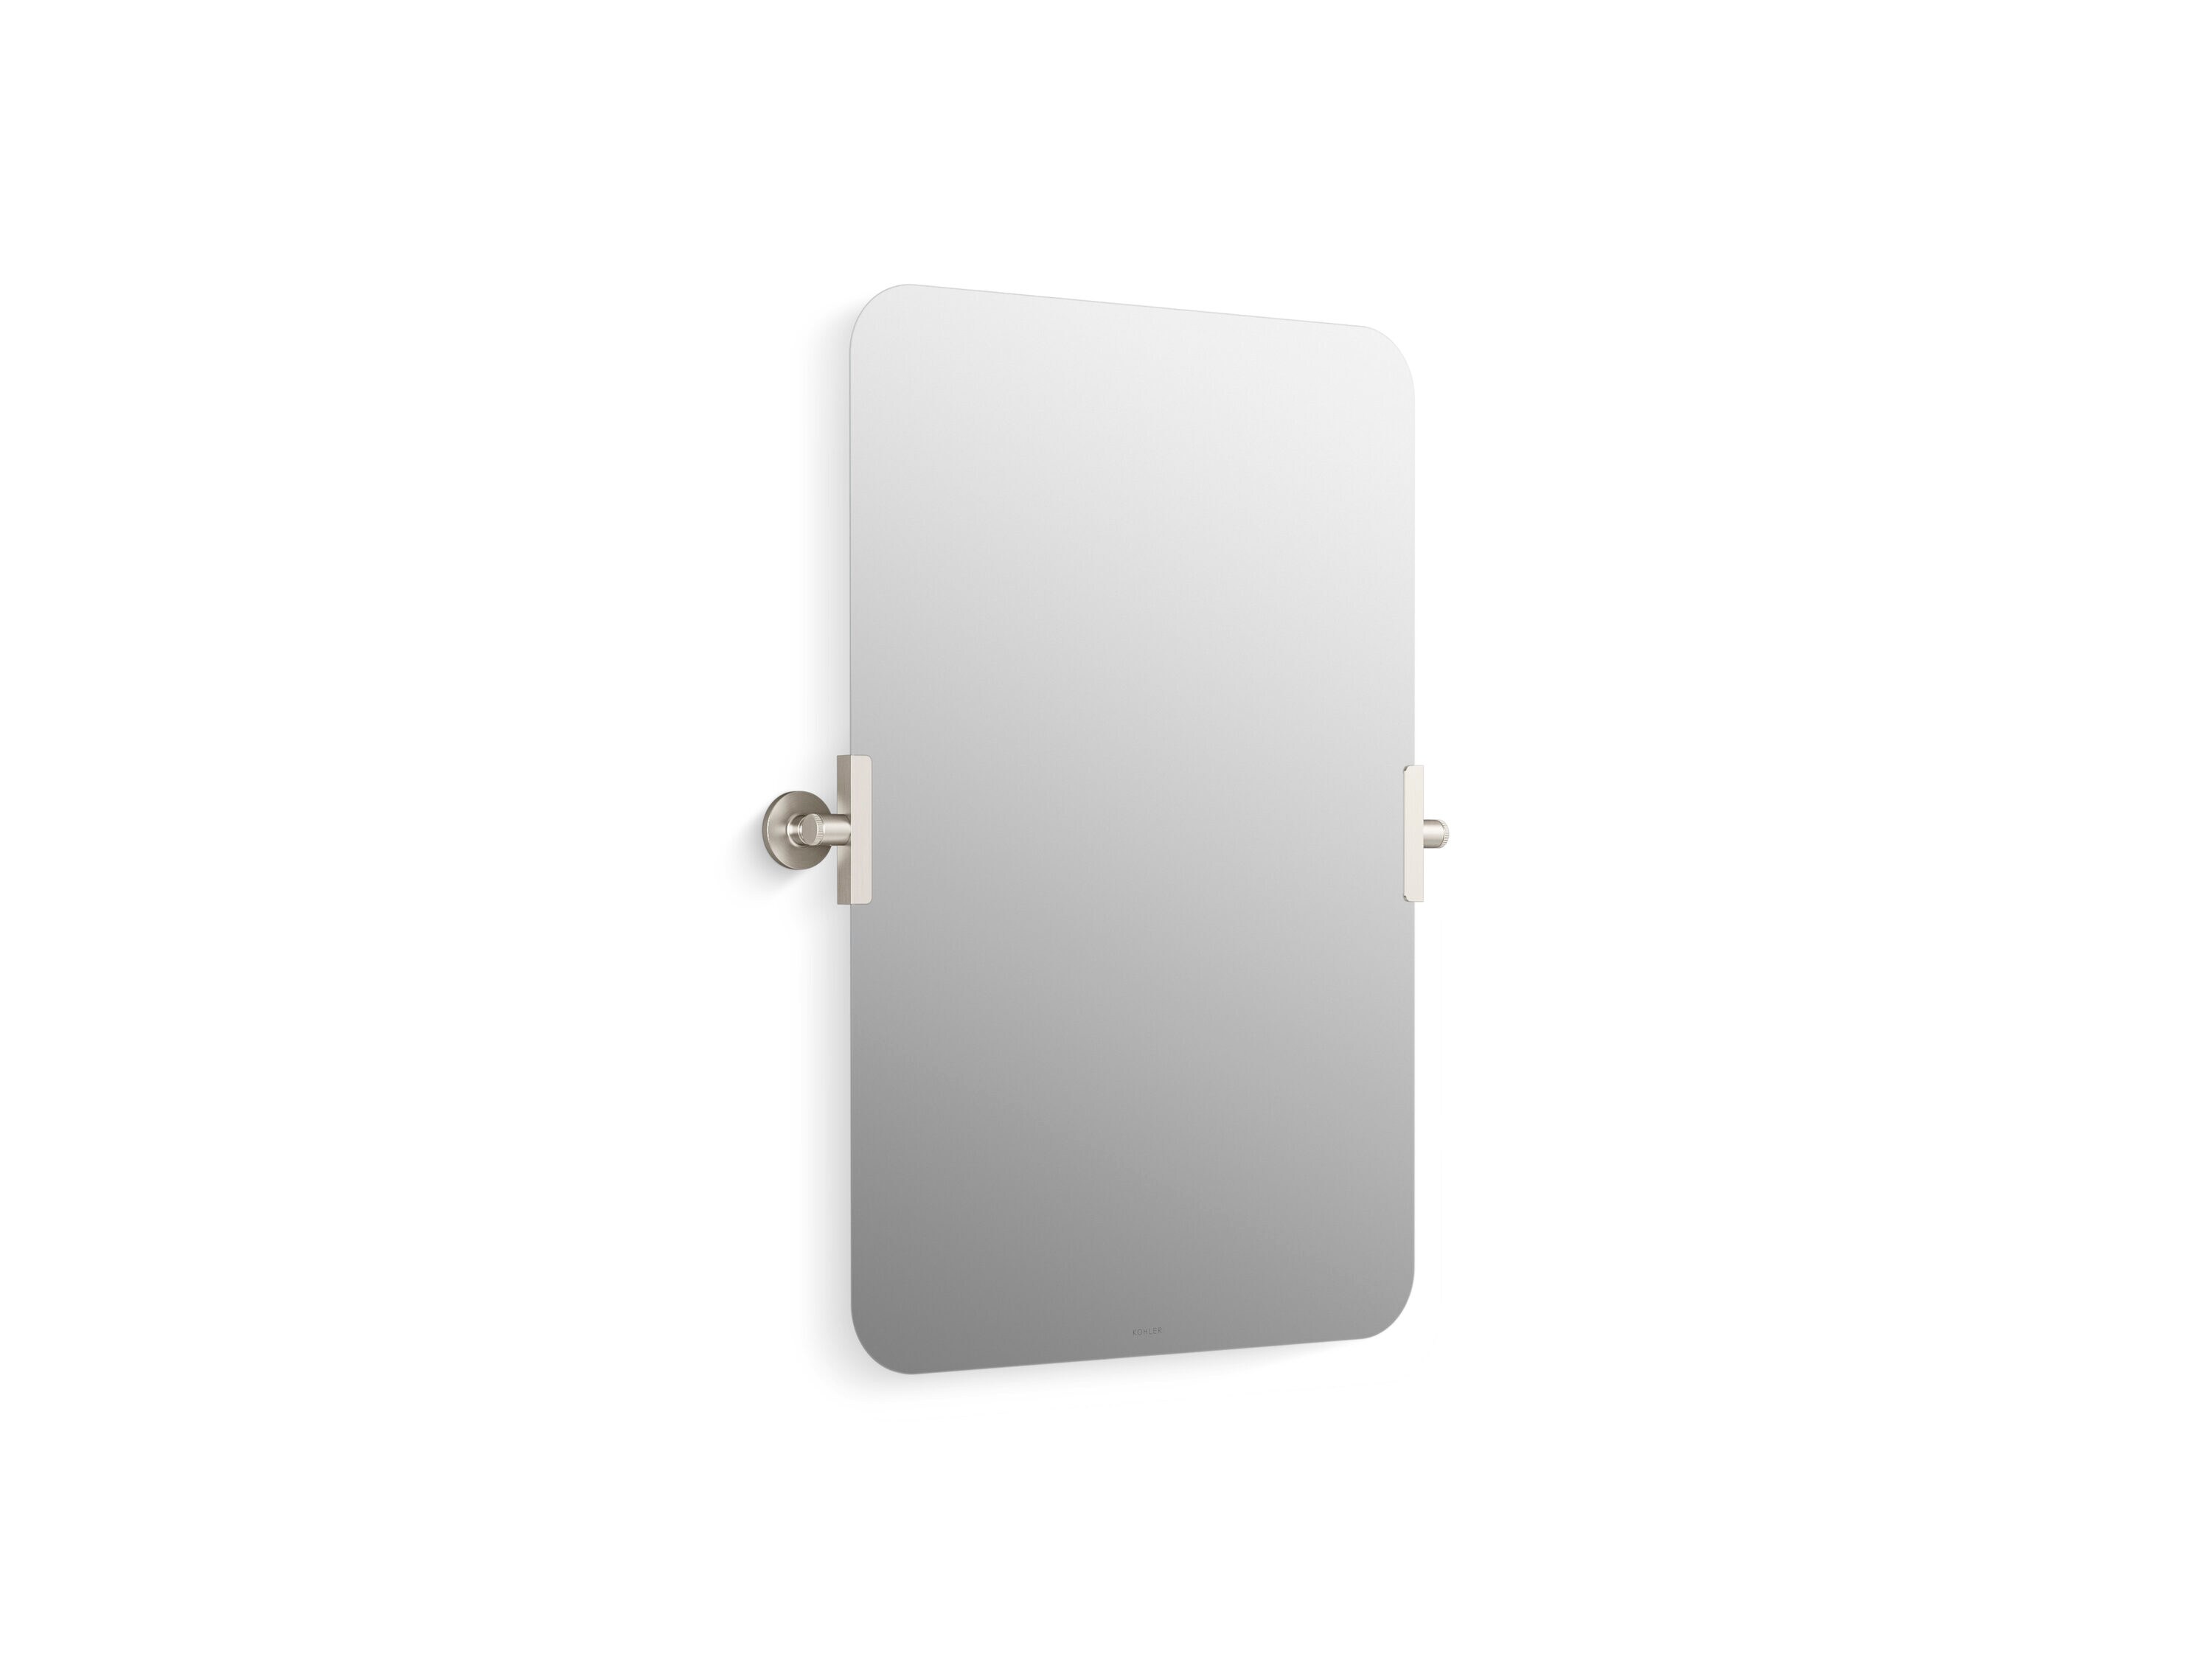 Ancerre Designs Immersion LED Frameless Mirror with Bluetooth, Defogger and Digital Display, 48 in. x 40 in.